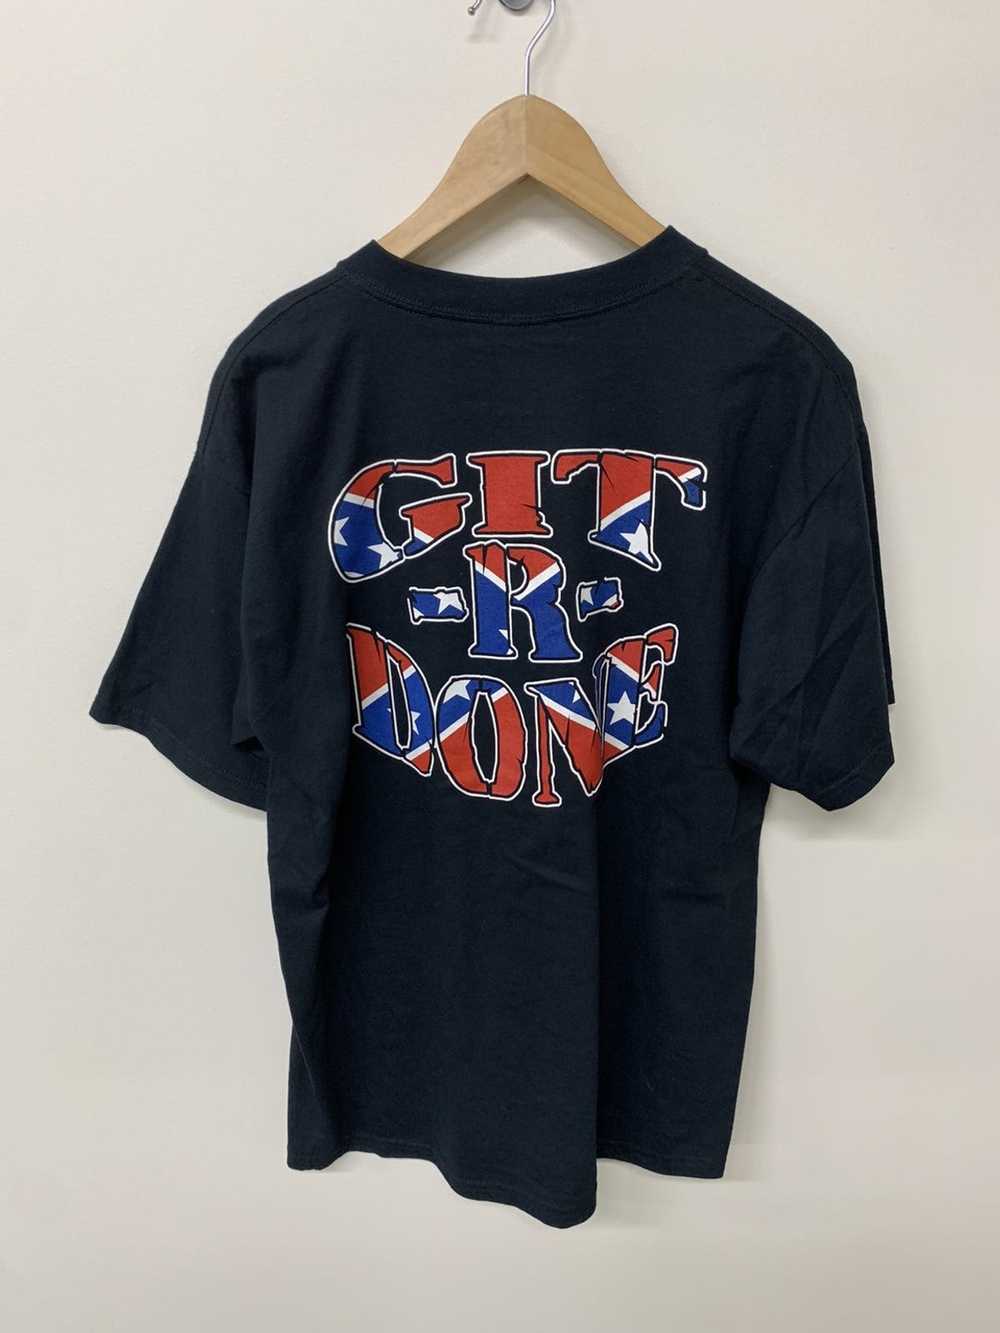 Vintage Vintage Larry the Cable Guy Tee - image 3